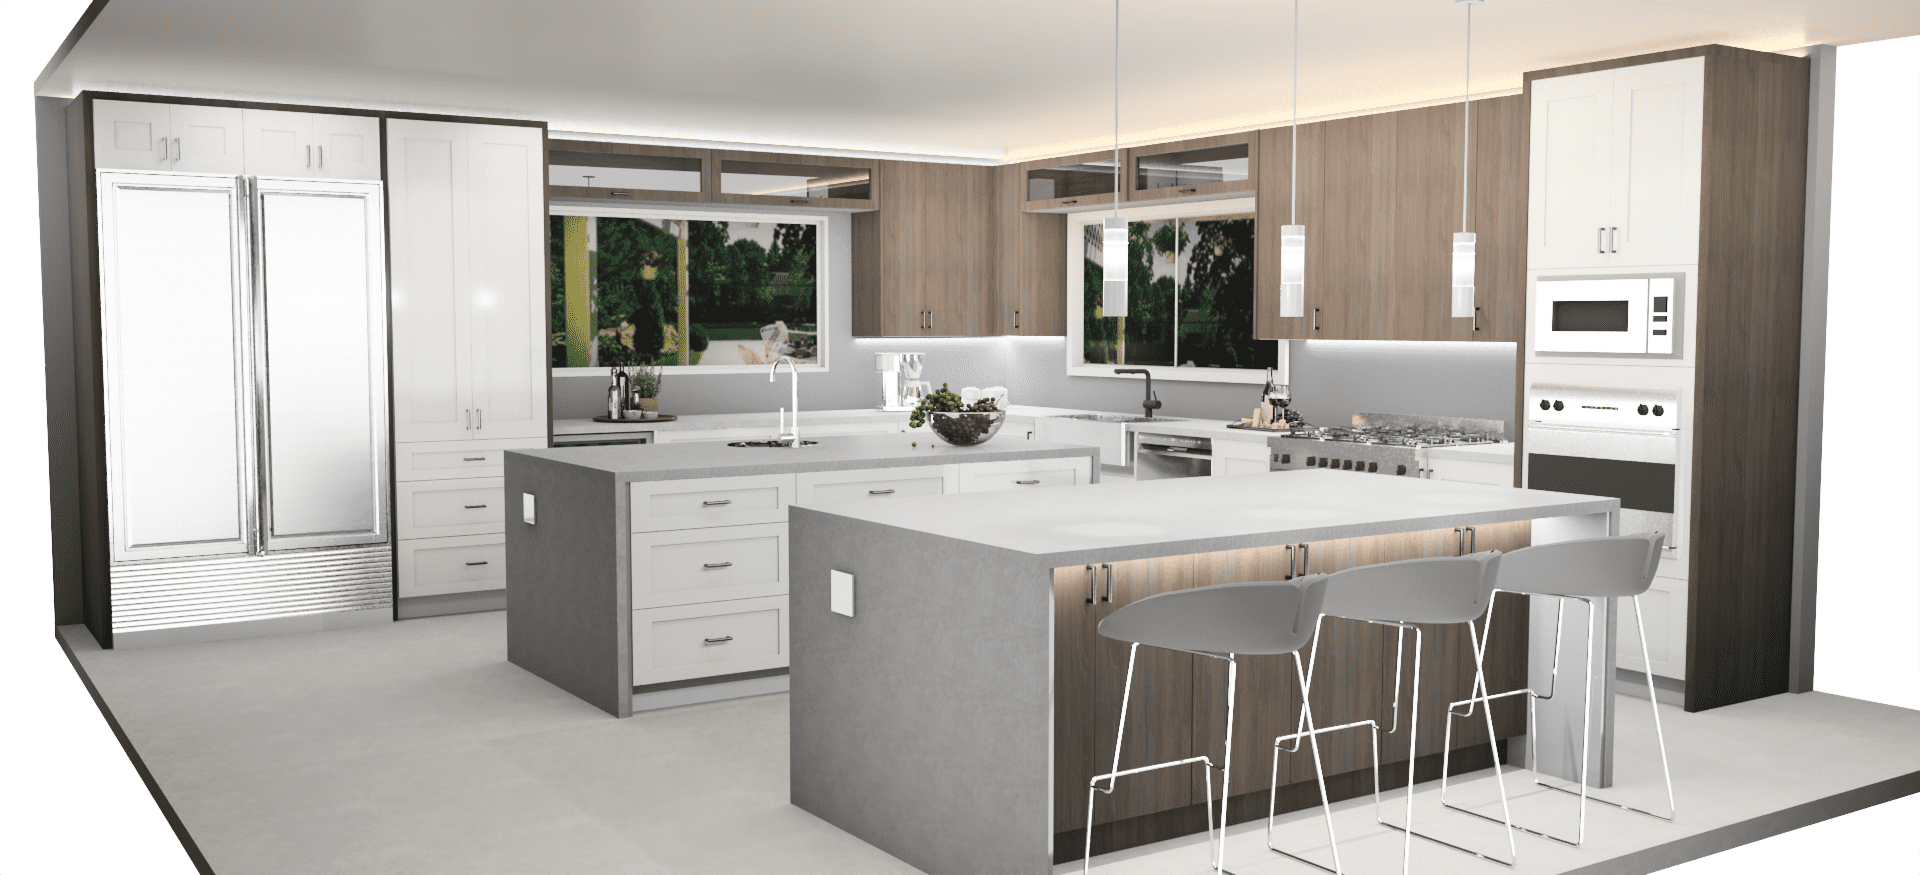 A kitchen with two sinks and a large island.